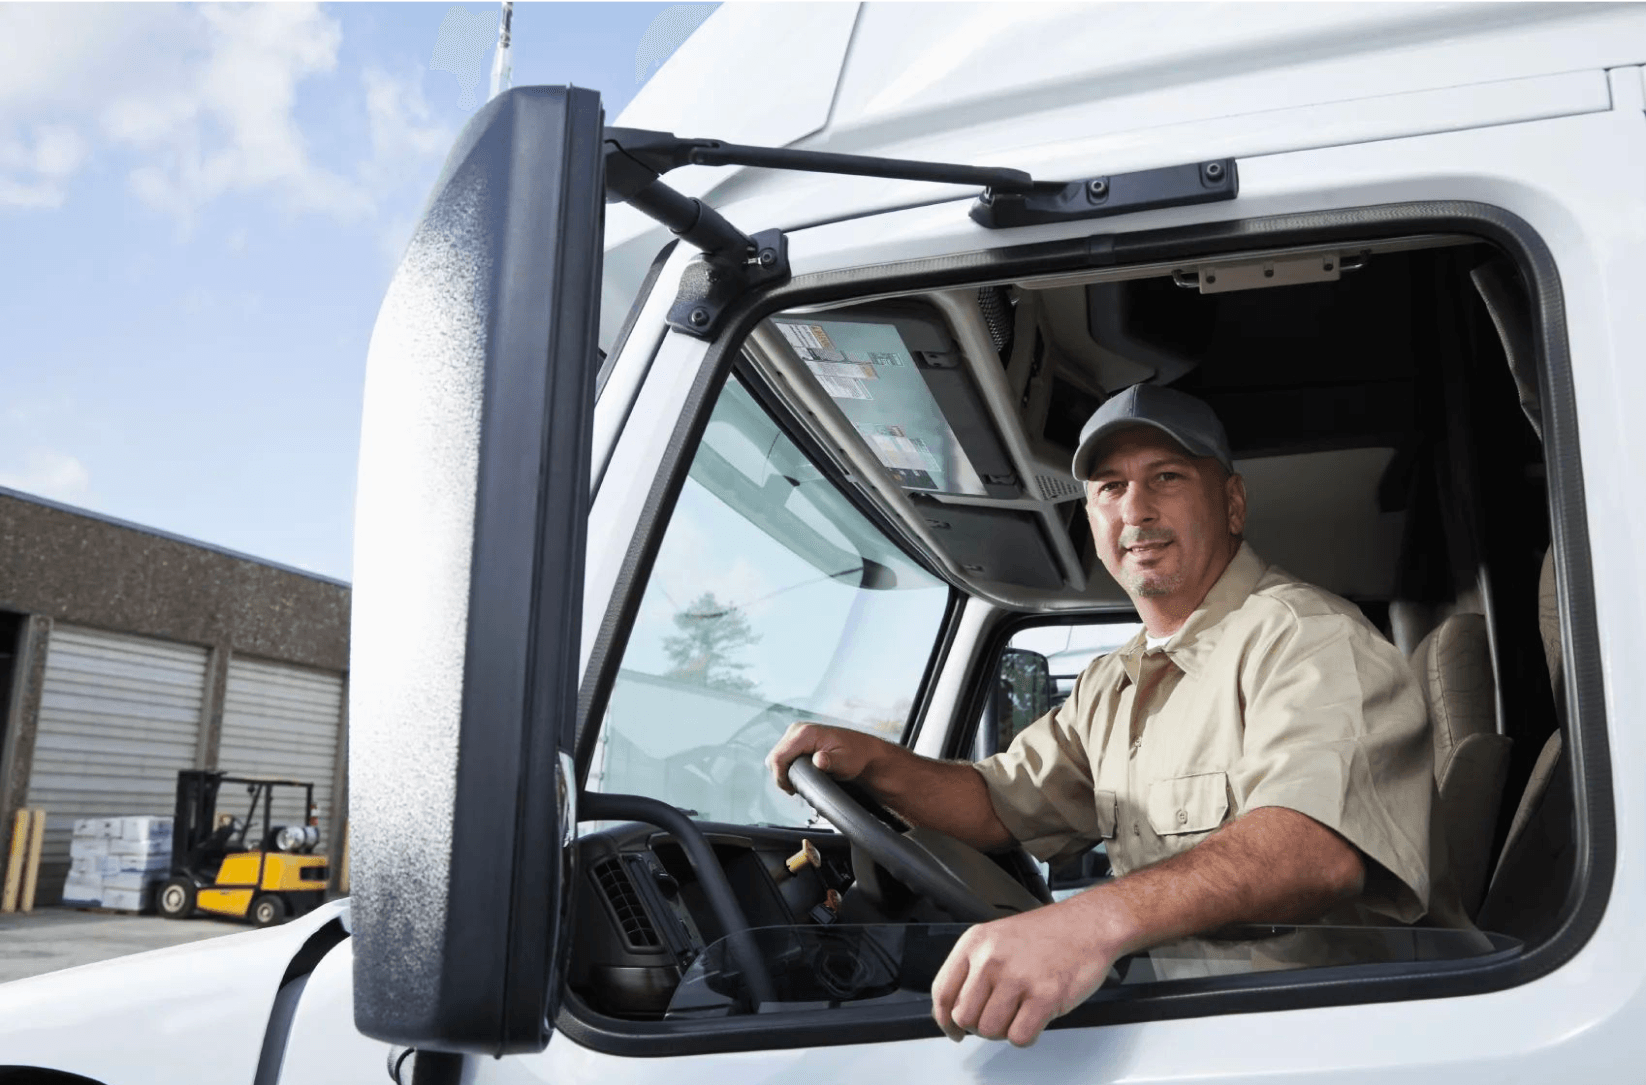 How do I know if I’m being compensated fairly as a truck driver?